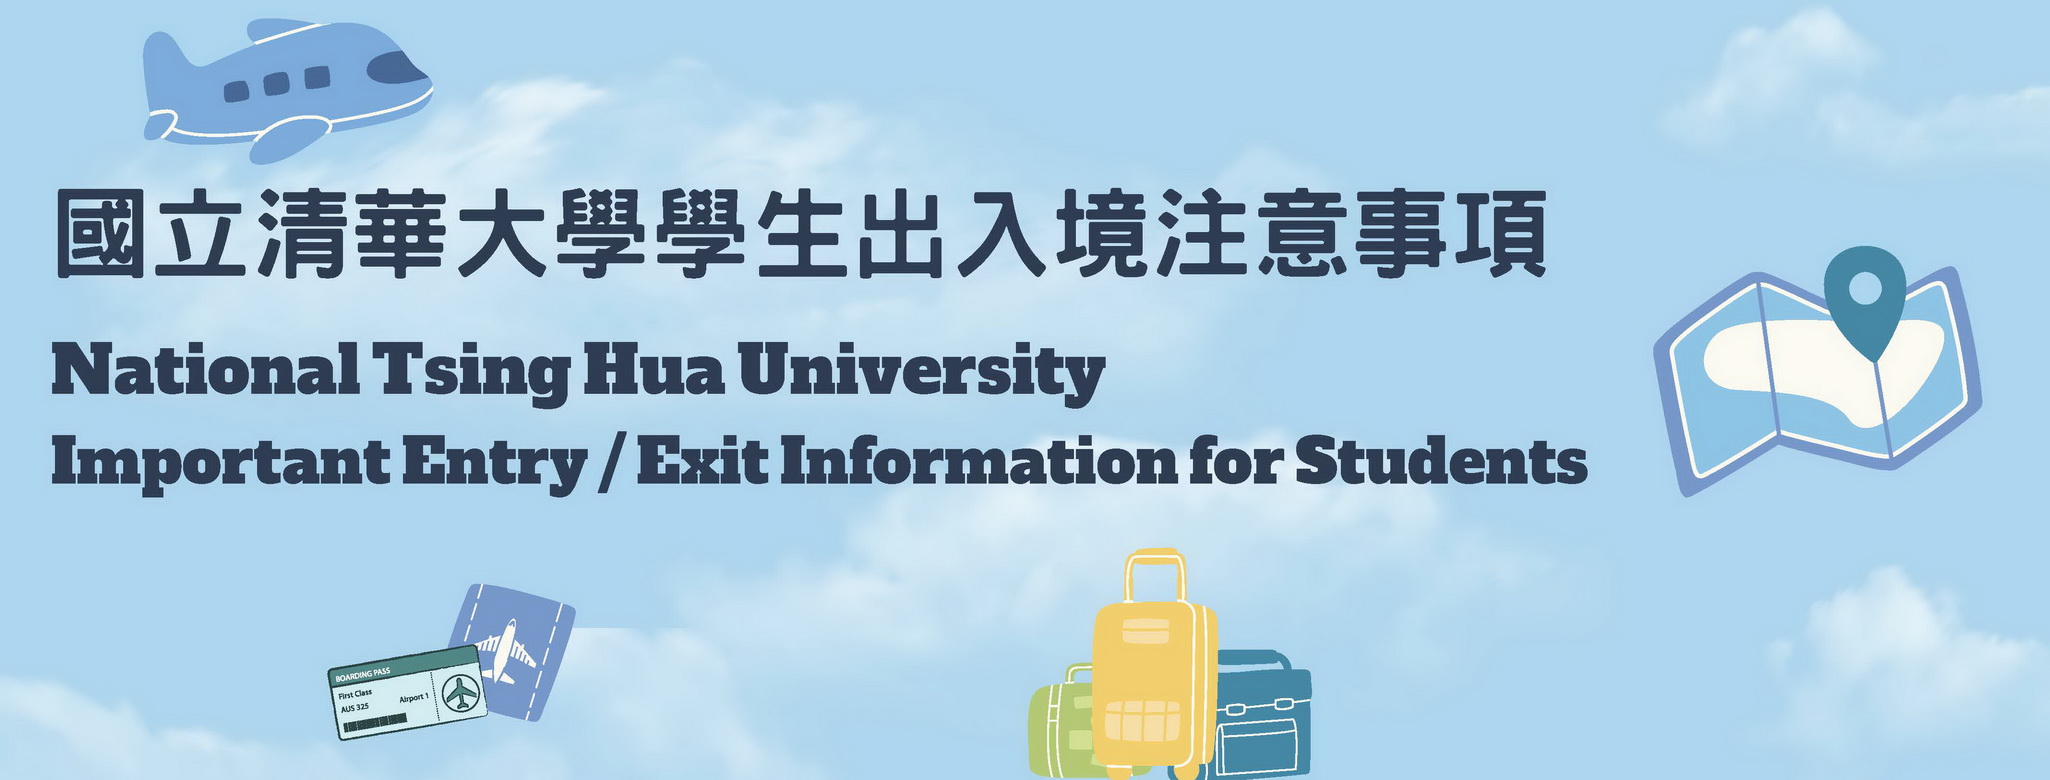 National Tsing Hua University Important Entry/ Exit Information for Students